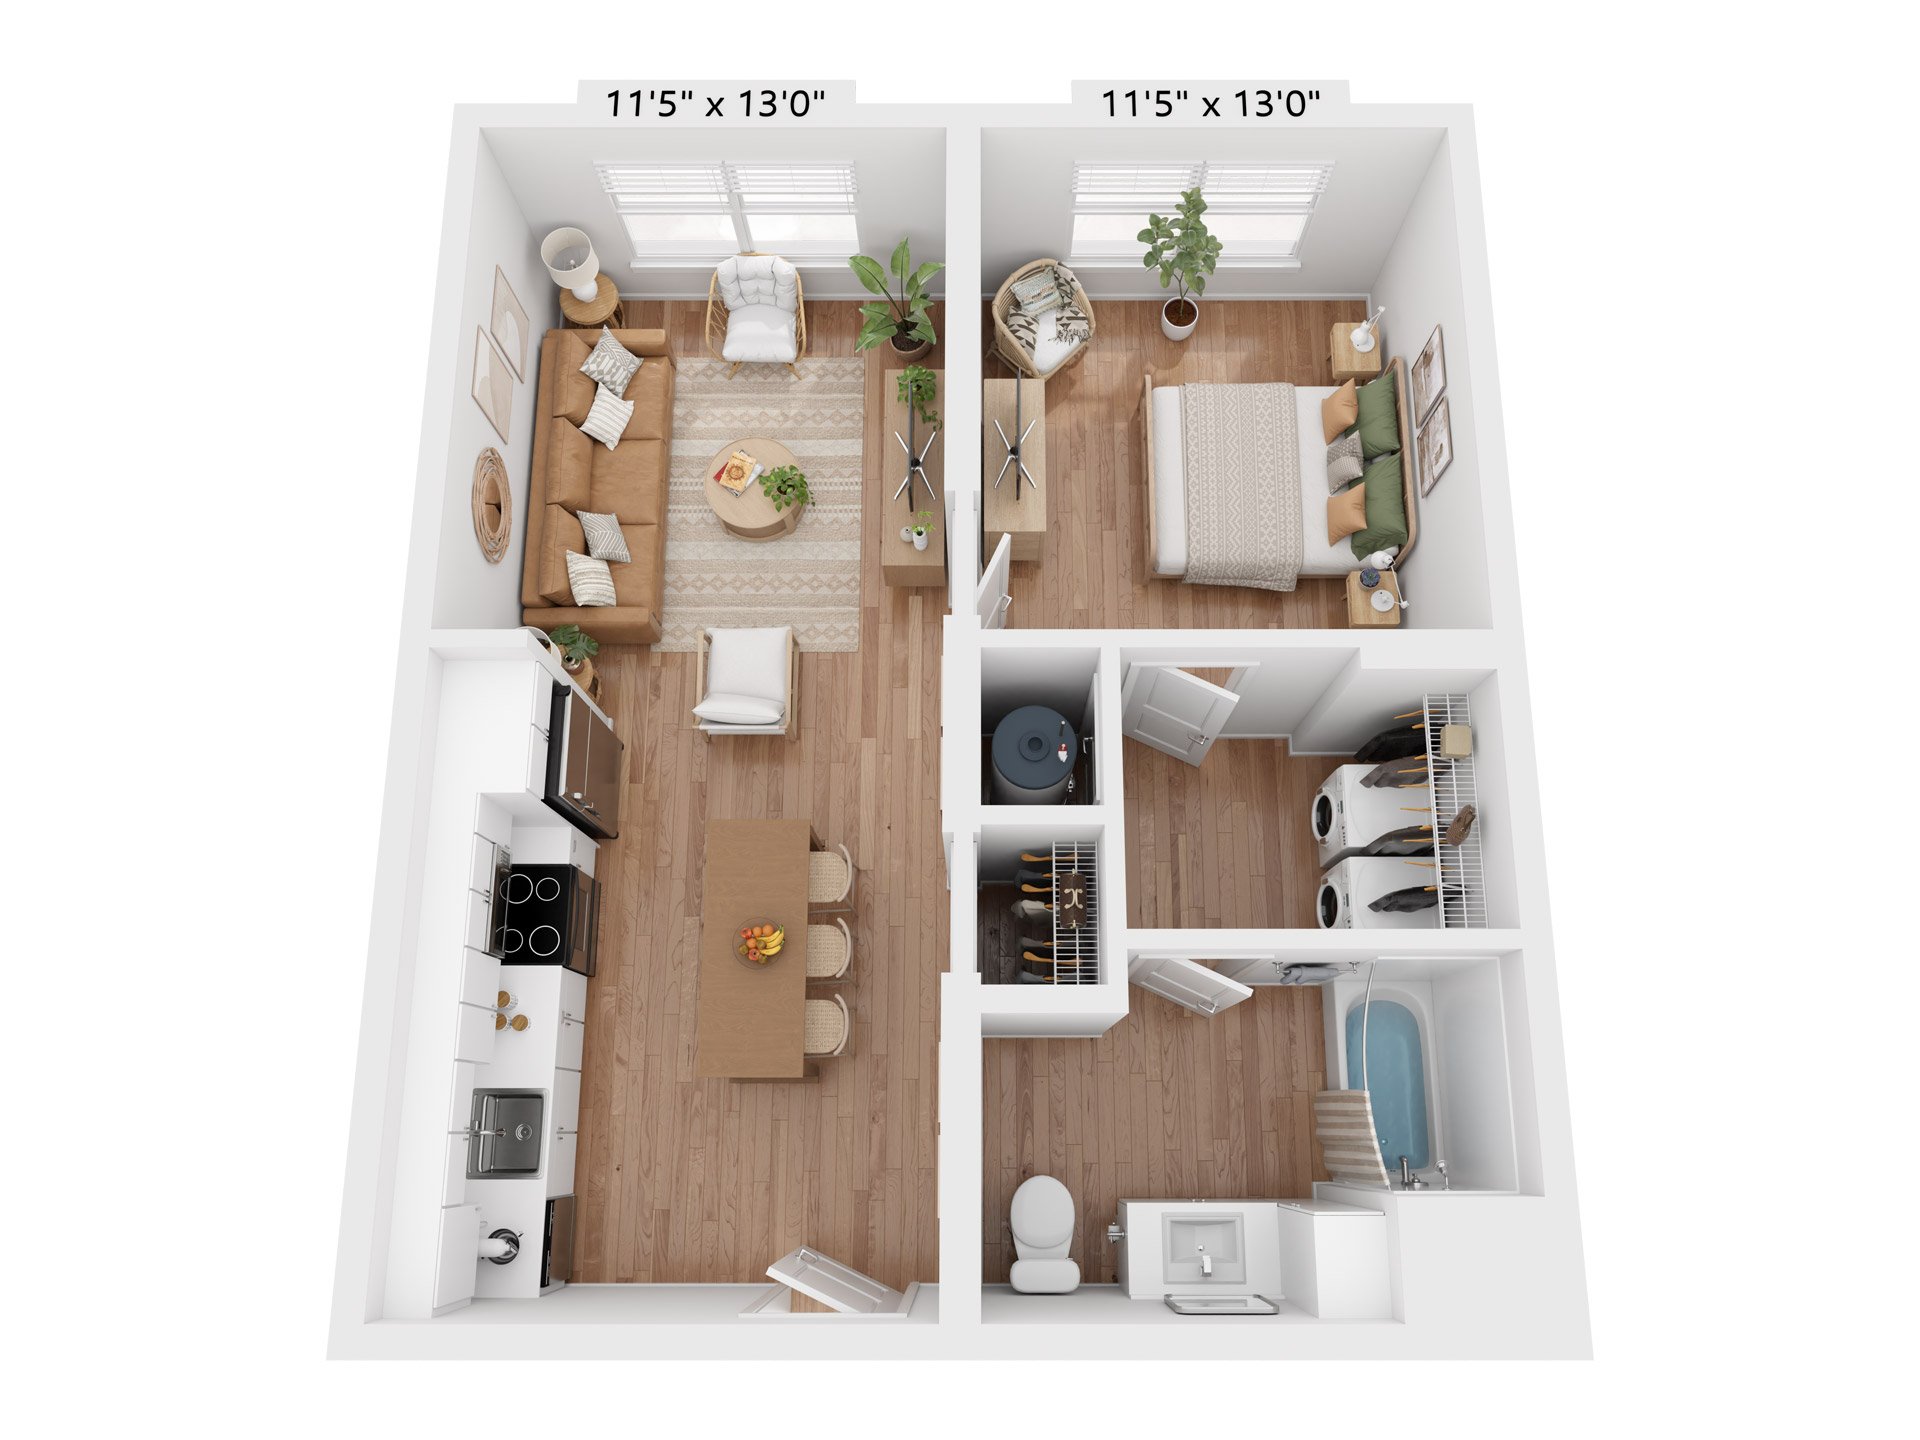 Floor plan map for a one bedroom apartment at Ltd. Findlay in Coraopolis, PA, featuring rooms with dimensions.